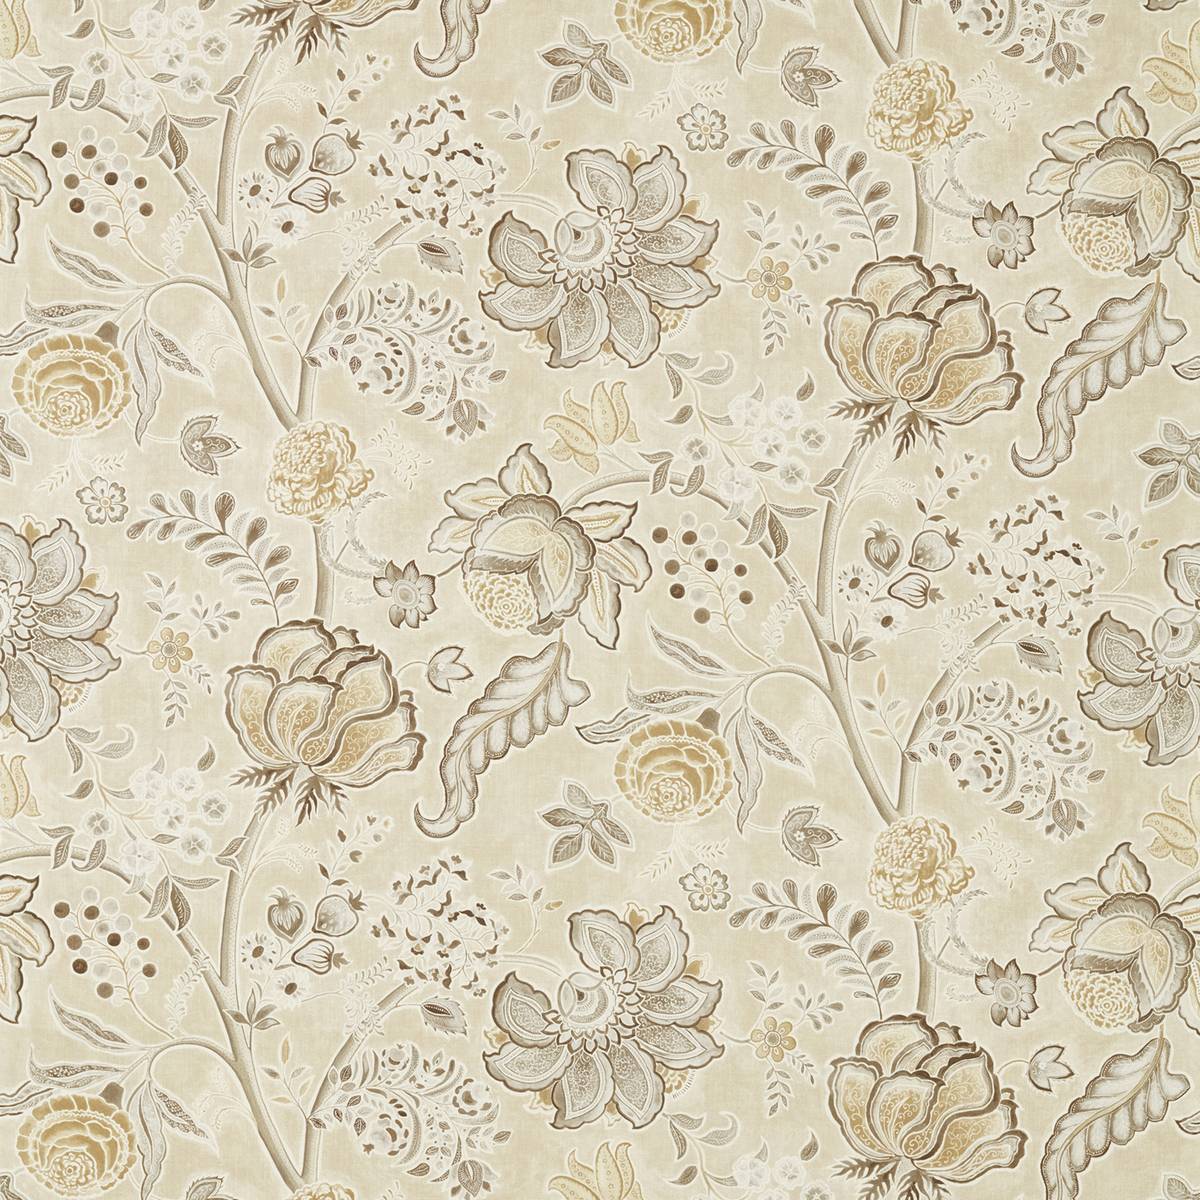 Shalimar Sepia/Linen Fabric by Sanderson